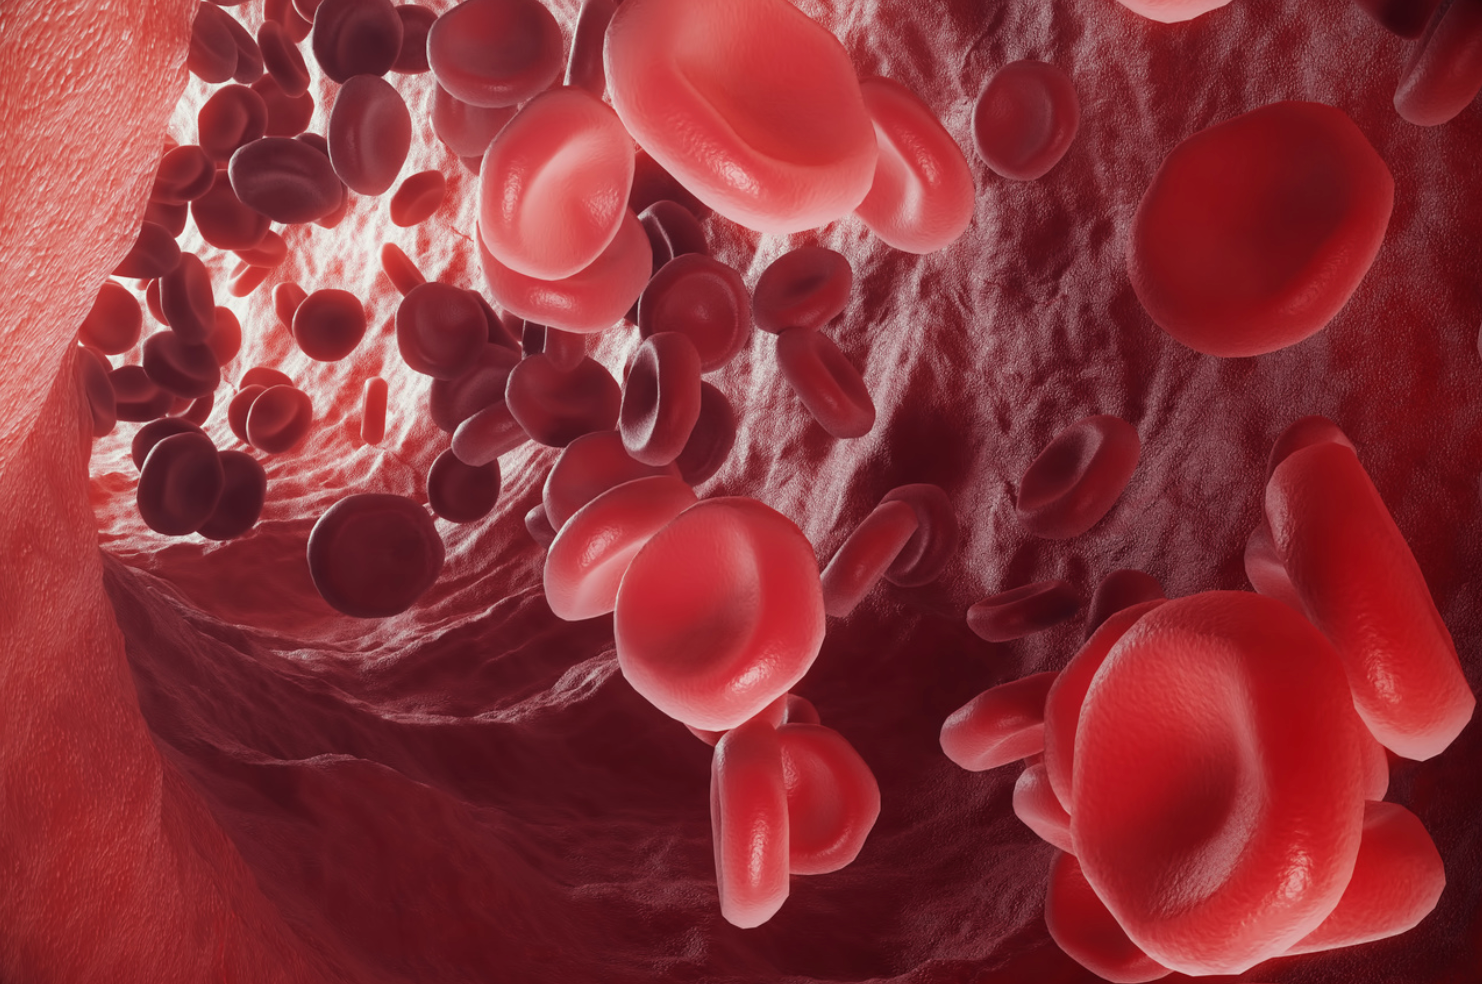 Data Show Rivaroxaban Lowers Severe Vascular Event Risk in Patients With PAD